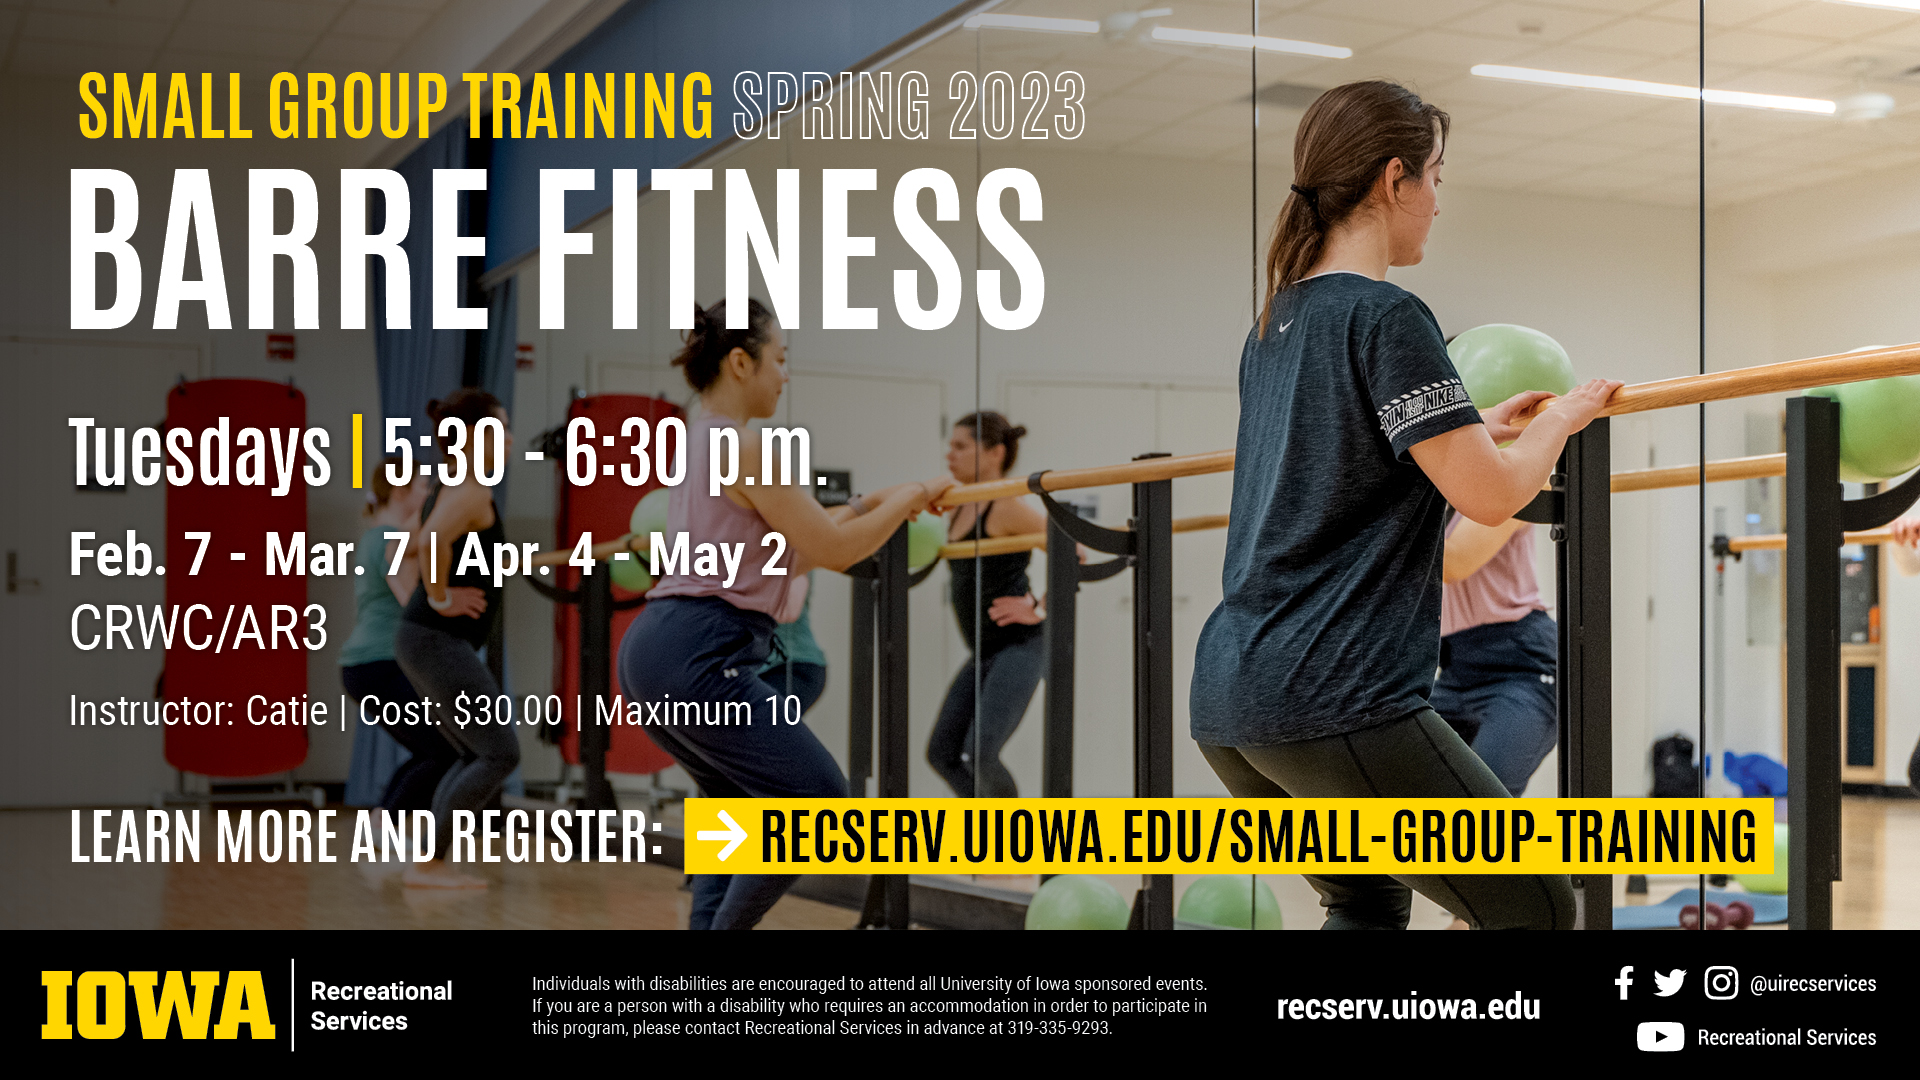 Small Group Training Spring 2023 Barre Fitness Tuesdays 5:30-6:30pm Feb 7-March 7, April 4-May 2nd Learn more and register: recserv.uiowa.edu/small-group-training